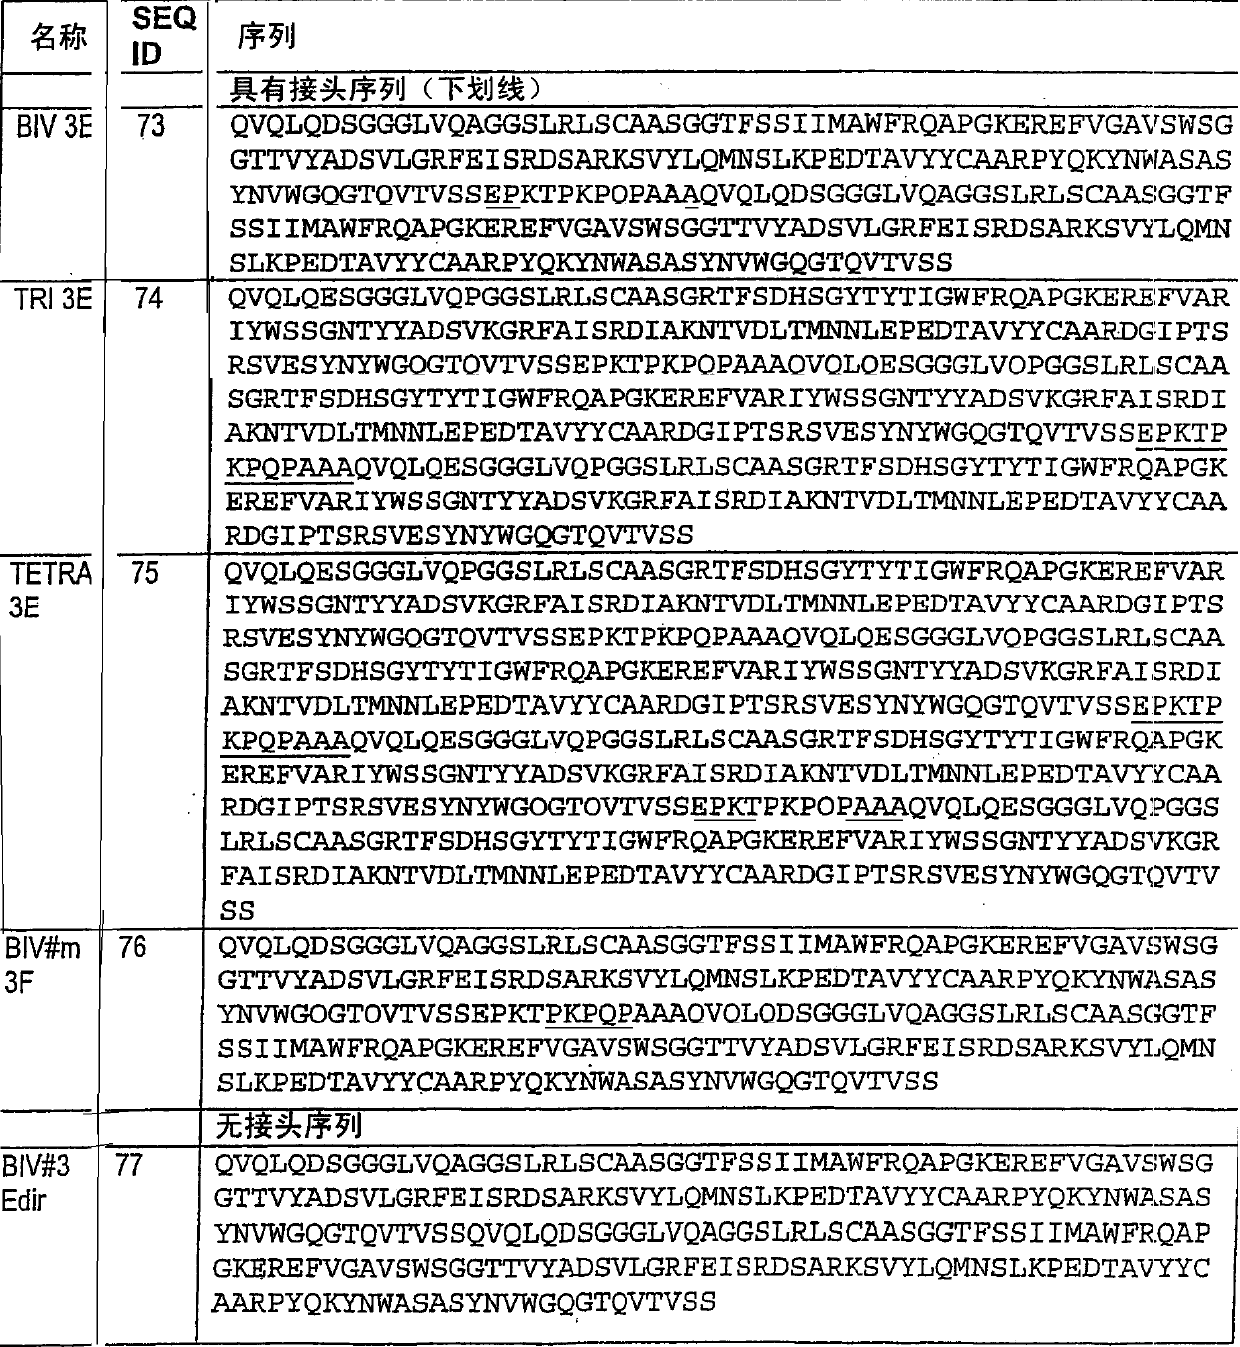 Single domain antibodies directed against tumor necrosis factor alpha and uses therefor